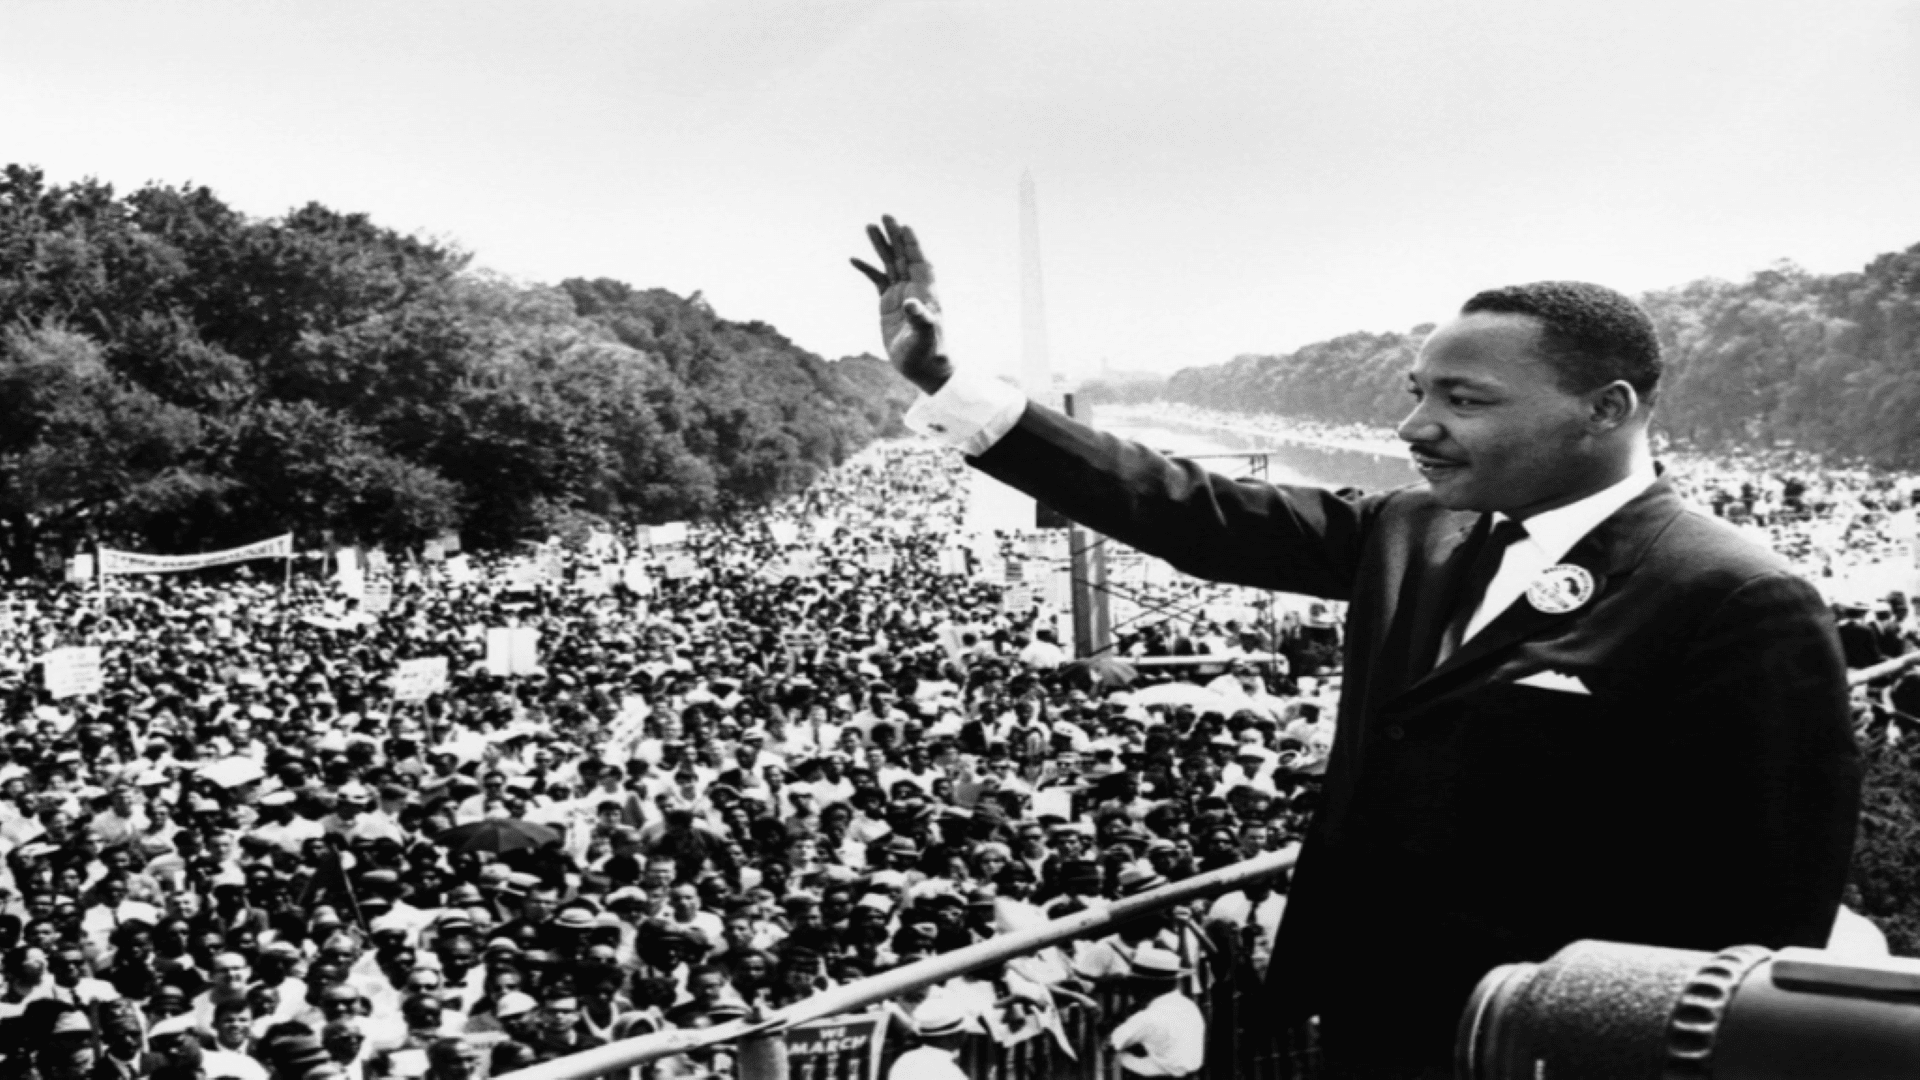 Since Dr. Martin Luther King Jr. delivered his "I Have a Dream" speech, great progress has been made towards racial equality. However, some of his complaints remain relevant today